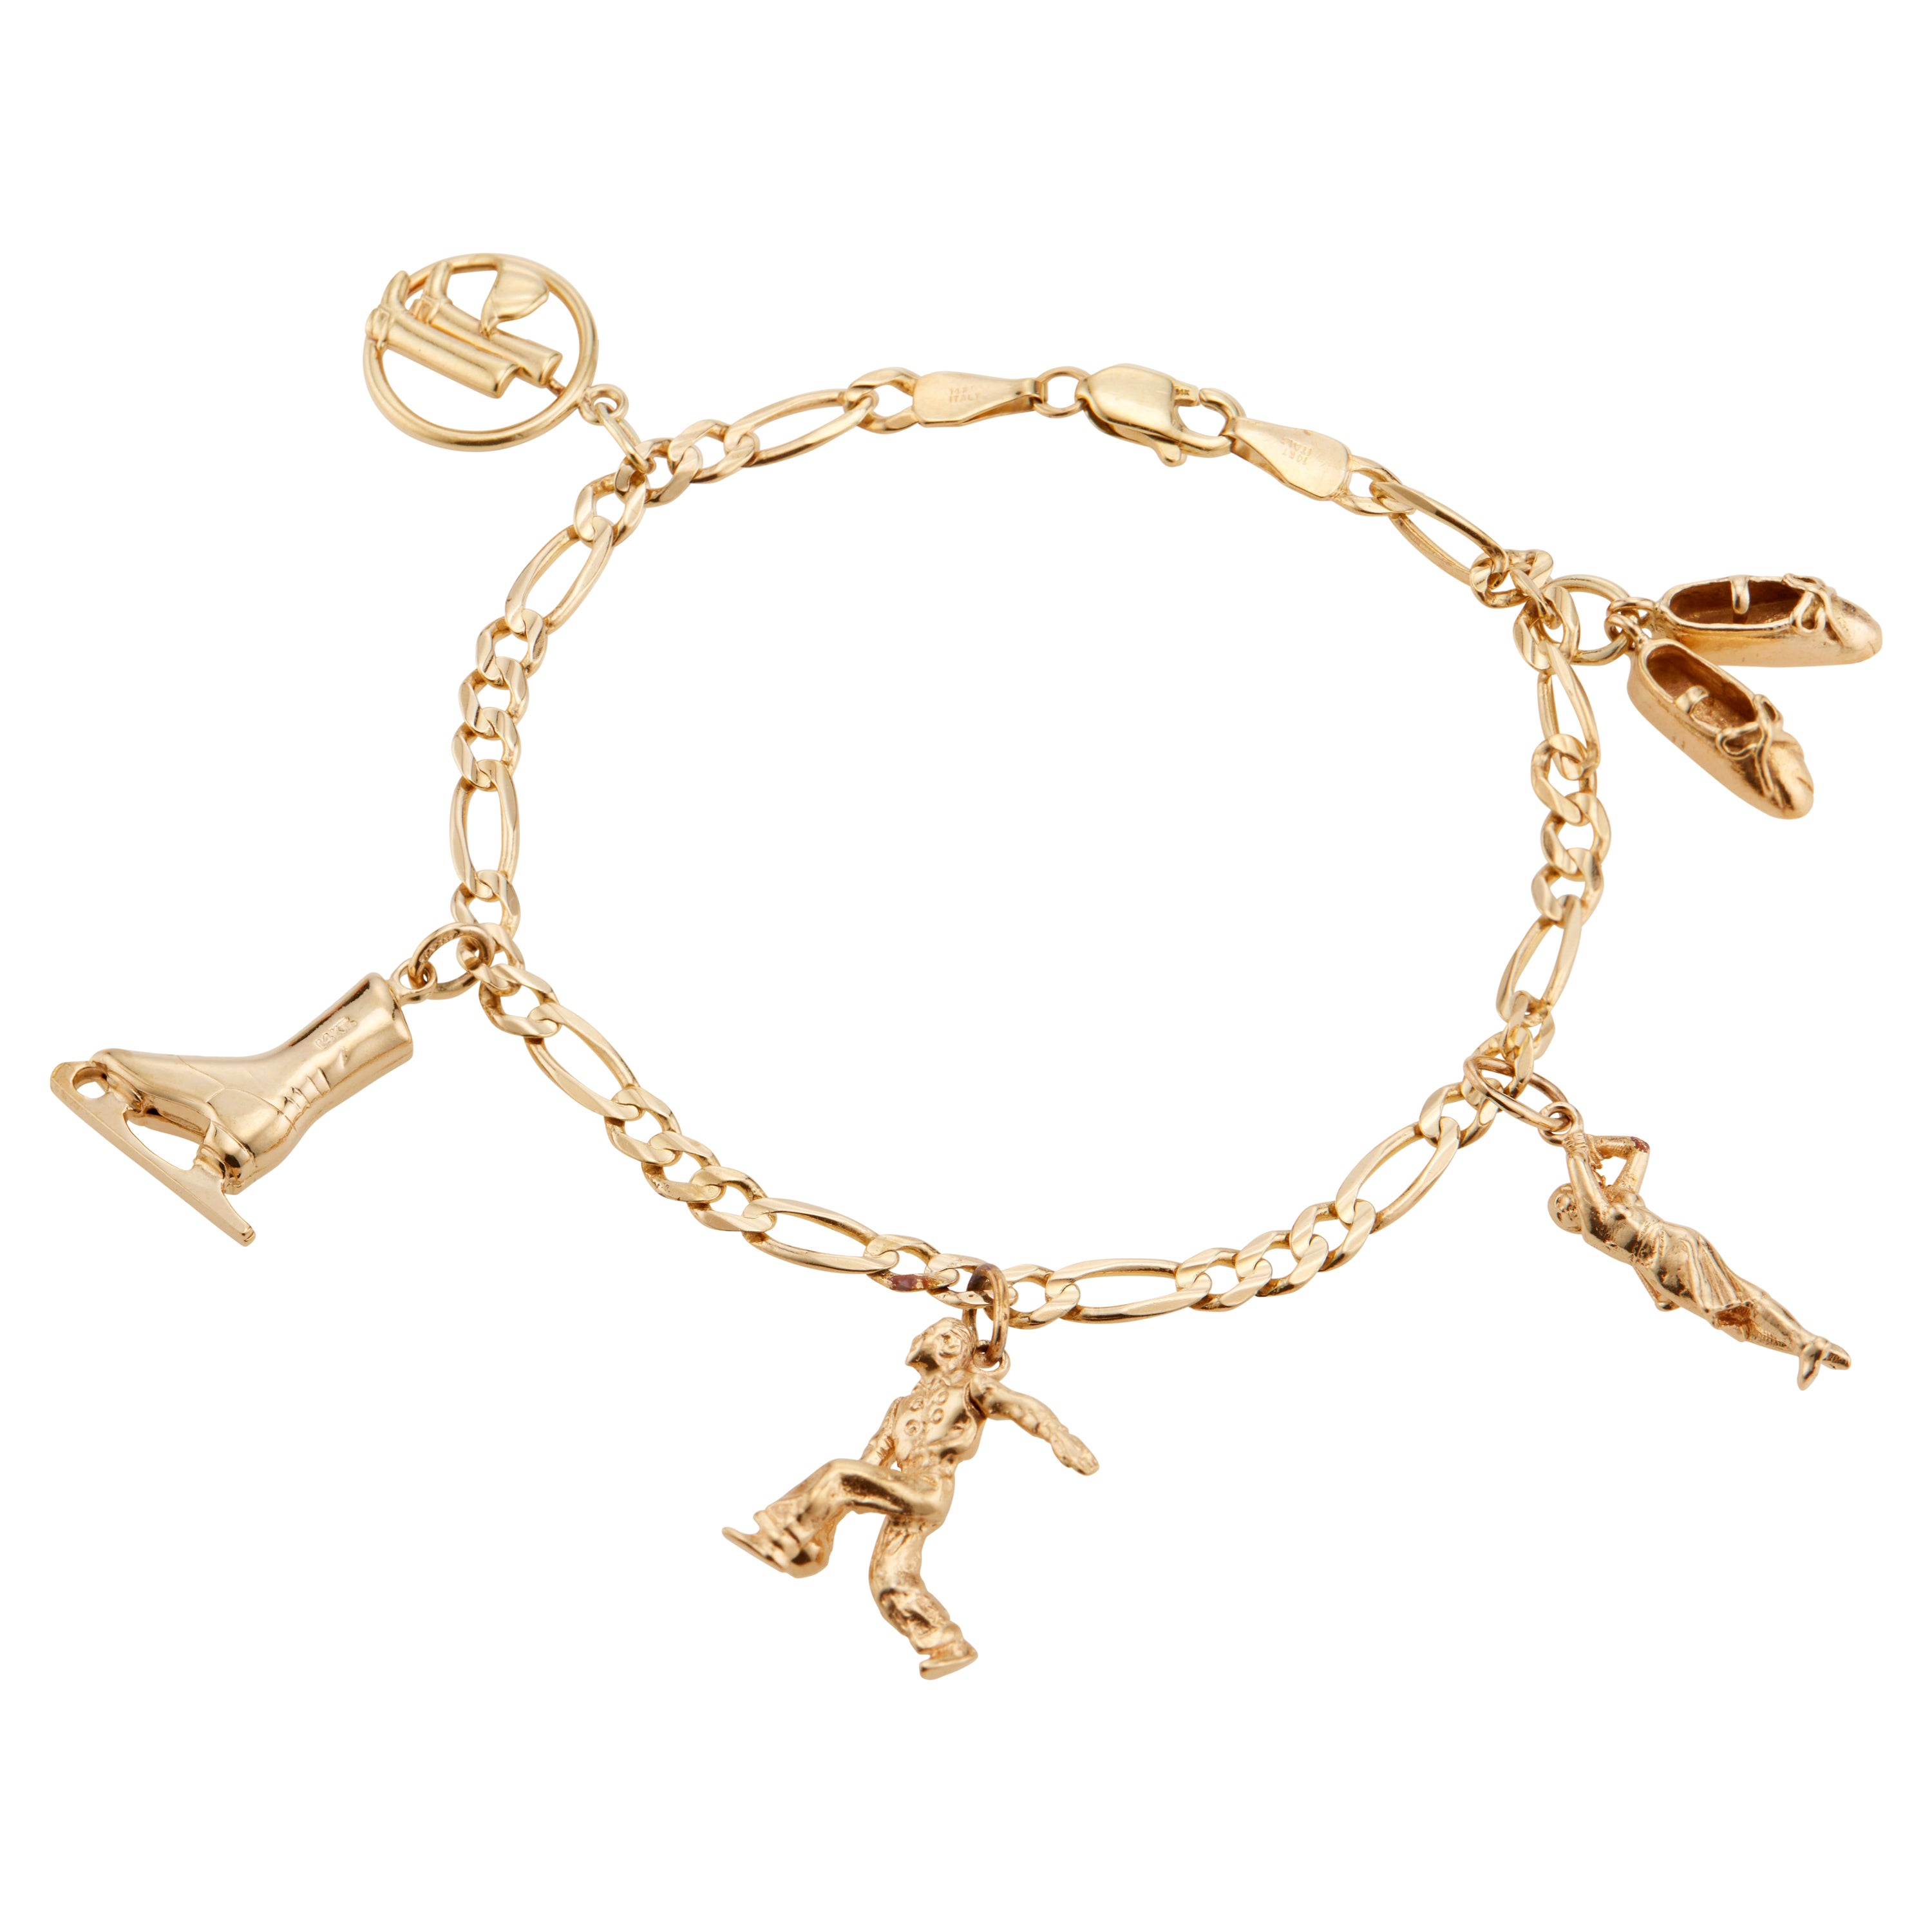 Chanel Iconic Lucky Charms Brooch - gold